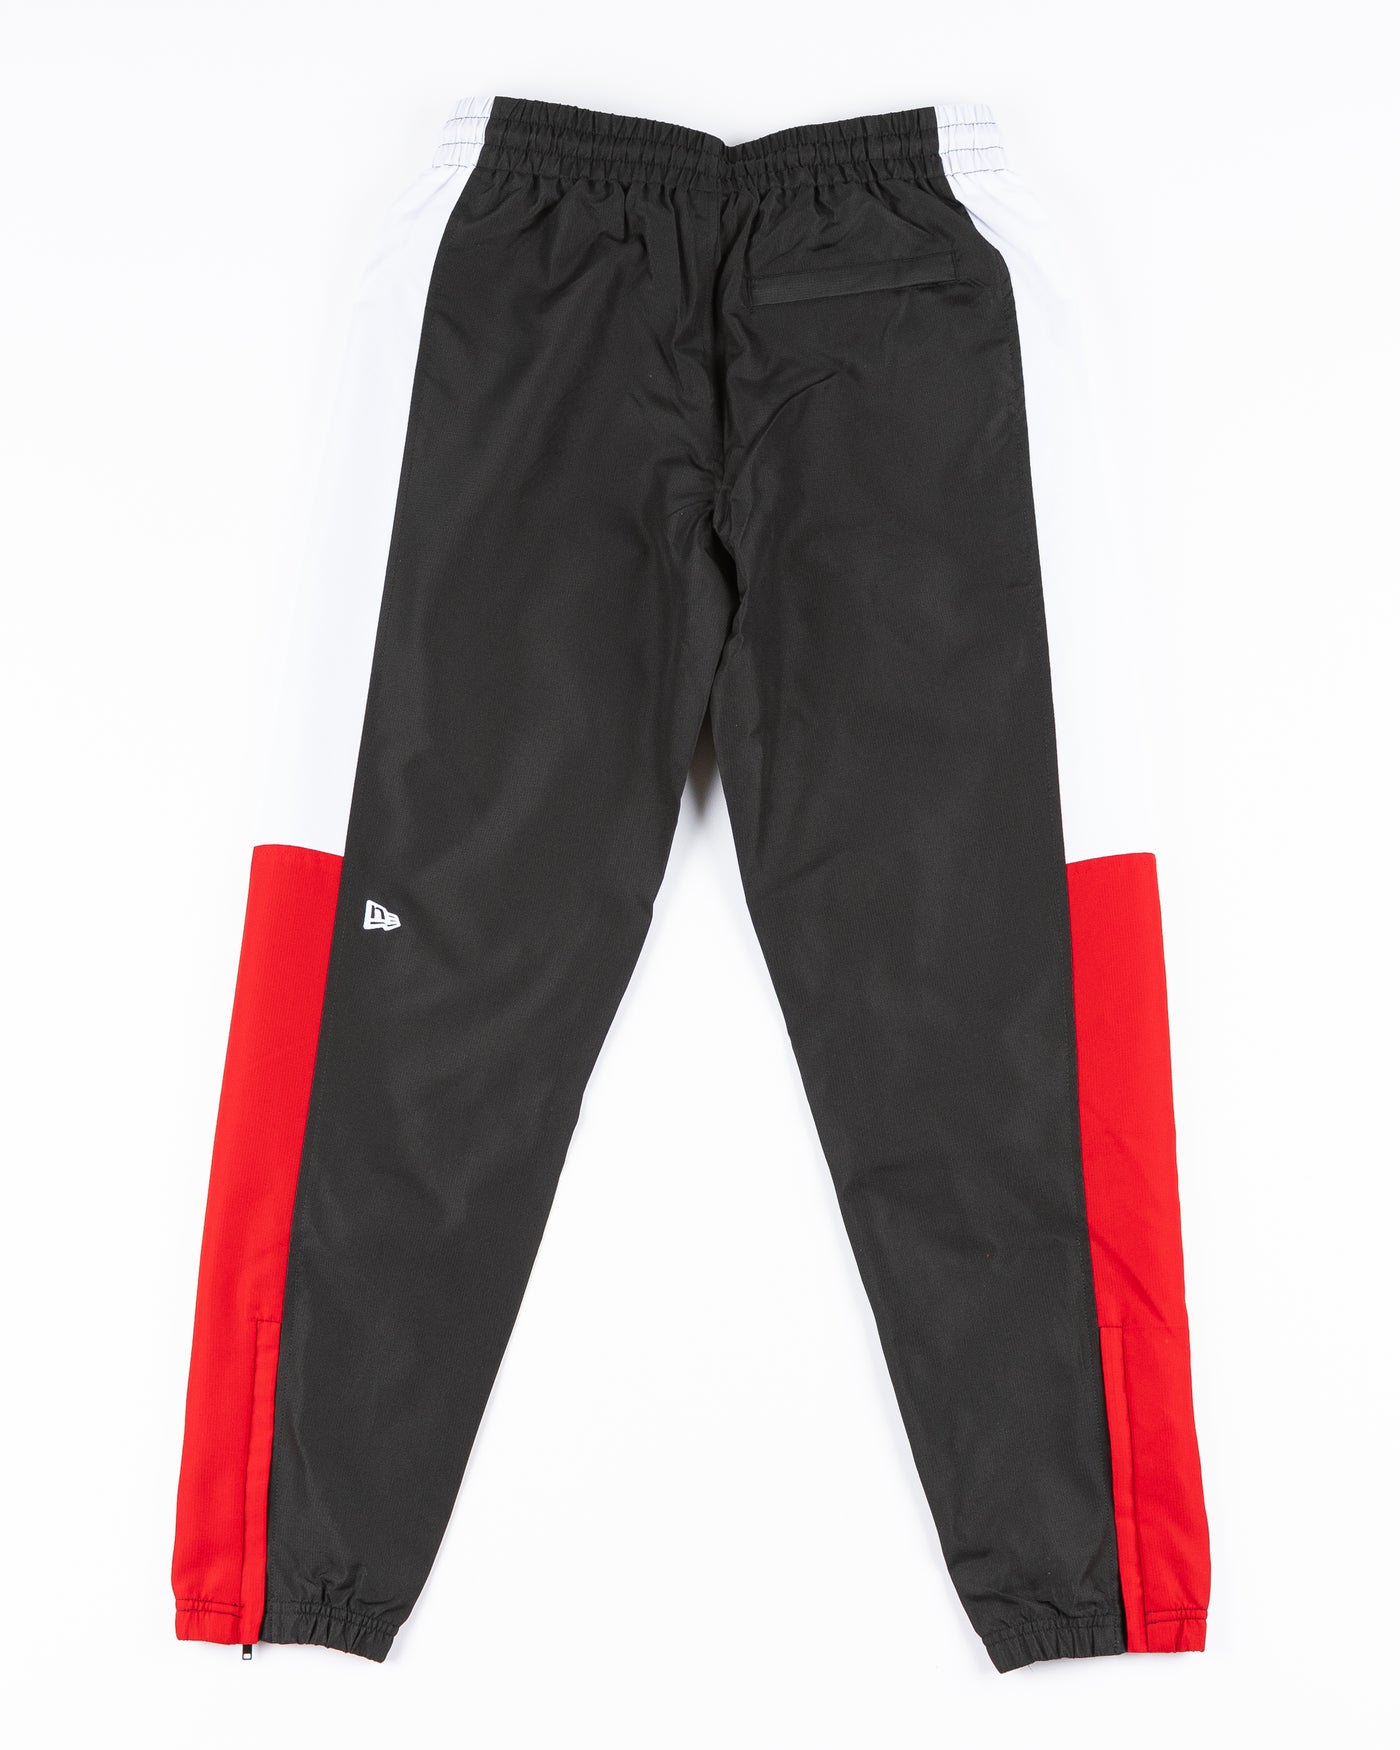 black red and white color blocked track pants with Chicago Blackhawks primary logo and wordmark on left leg - back lay flat